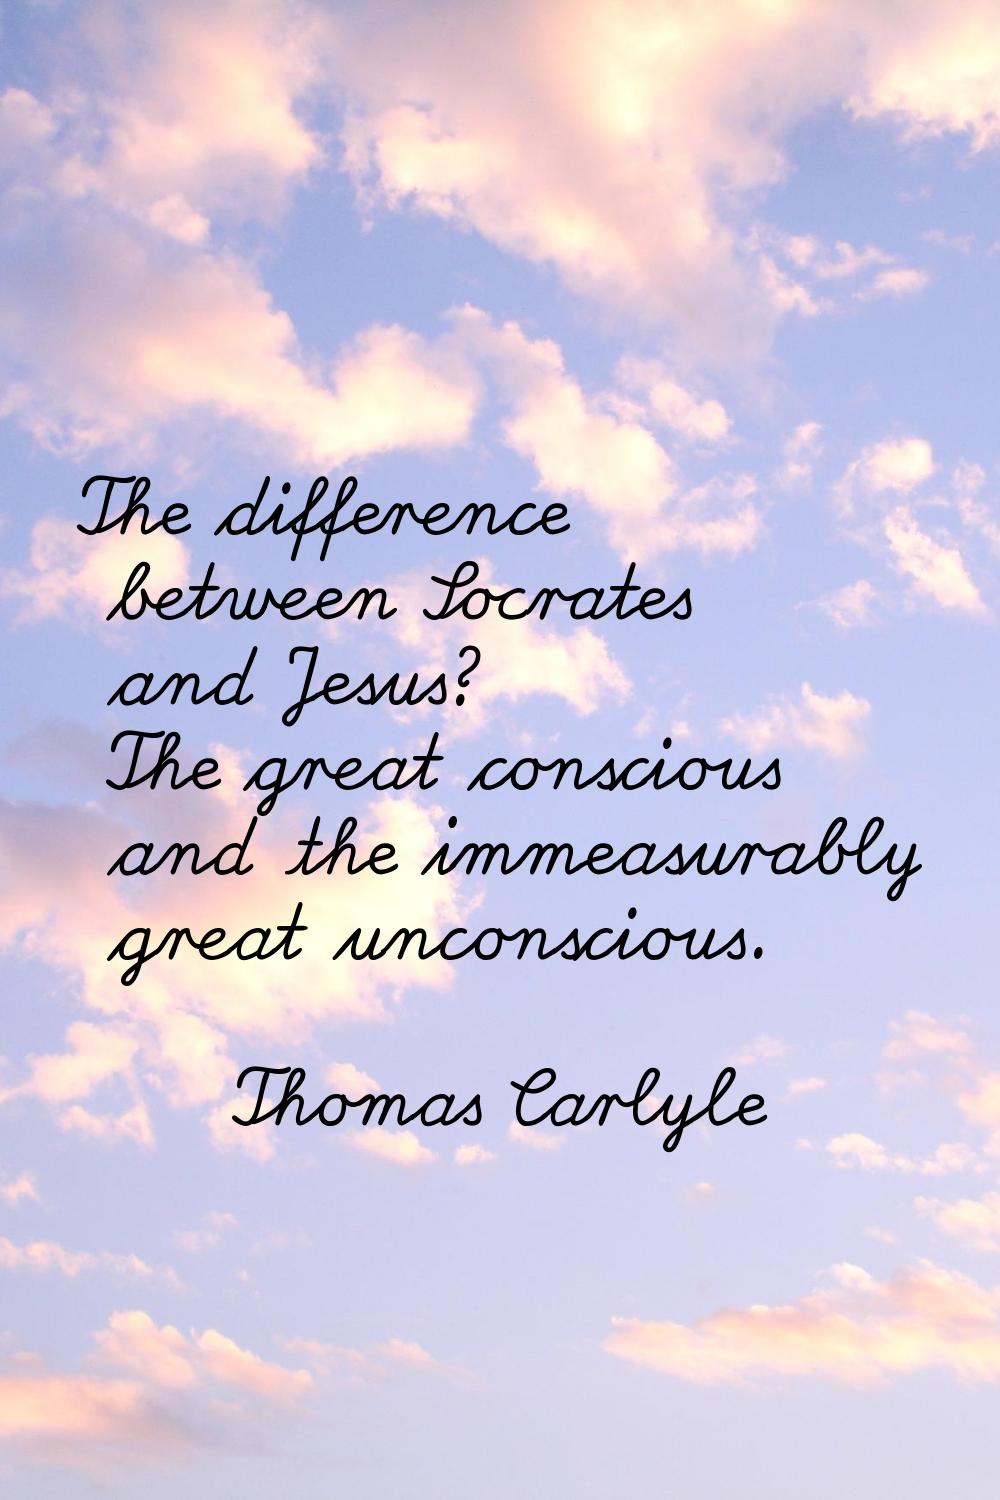 The difference between Socrates and Jesus? The great conscious and the immeasurably great unconscio